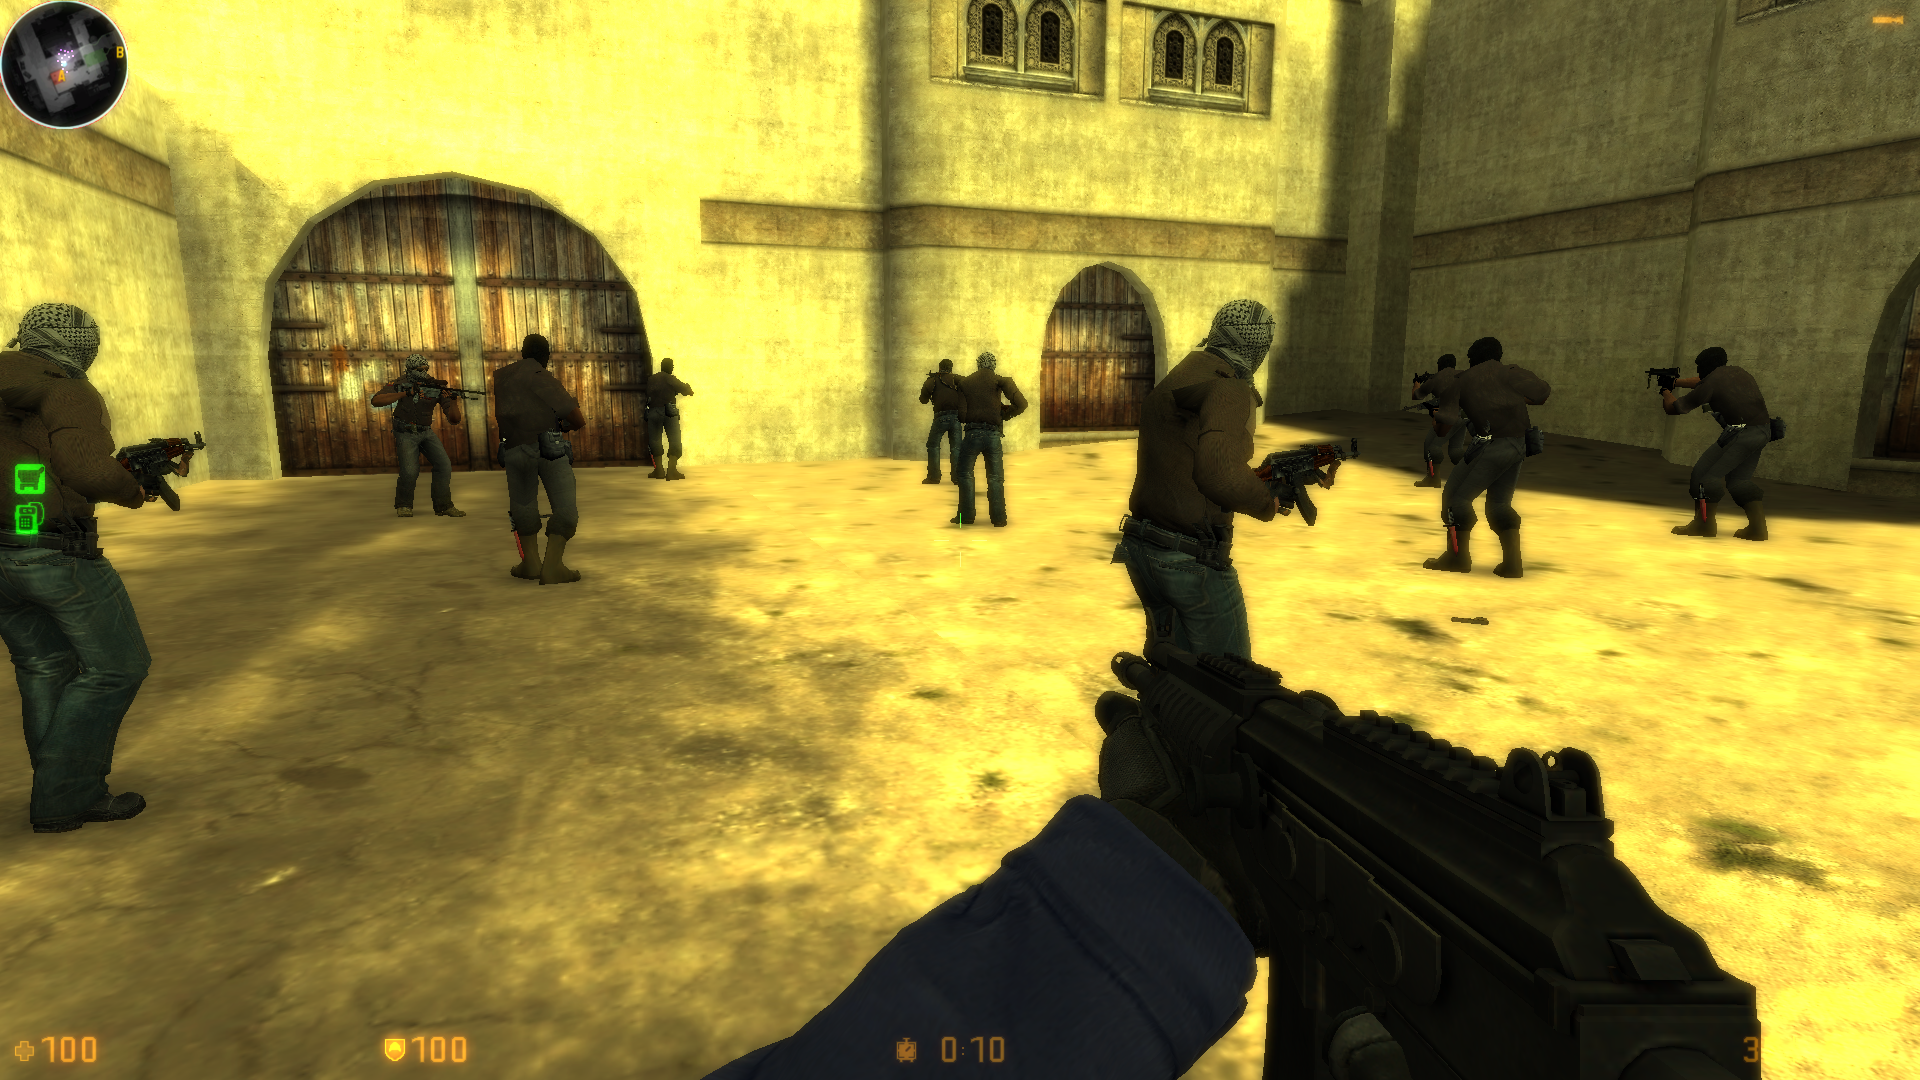 Download Counter-Strike 1.6 for Windows 10